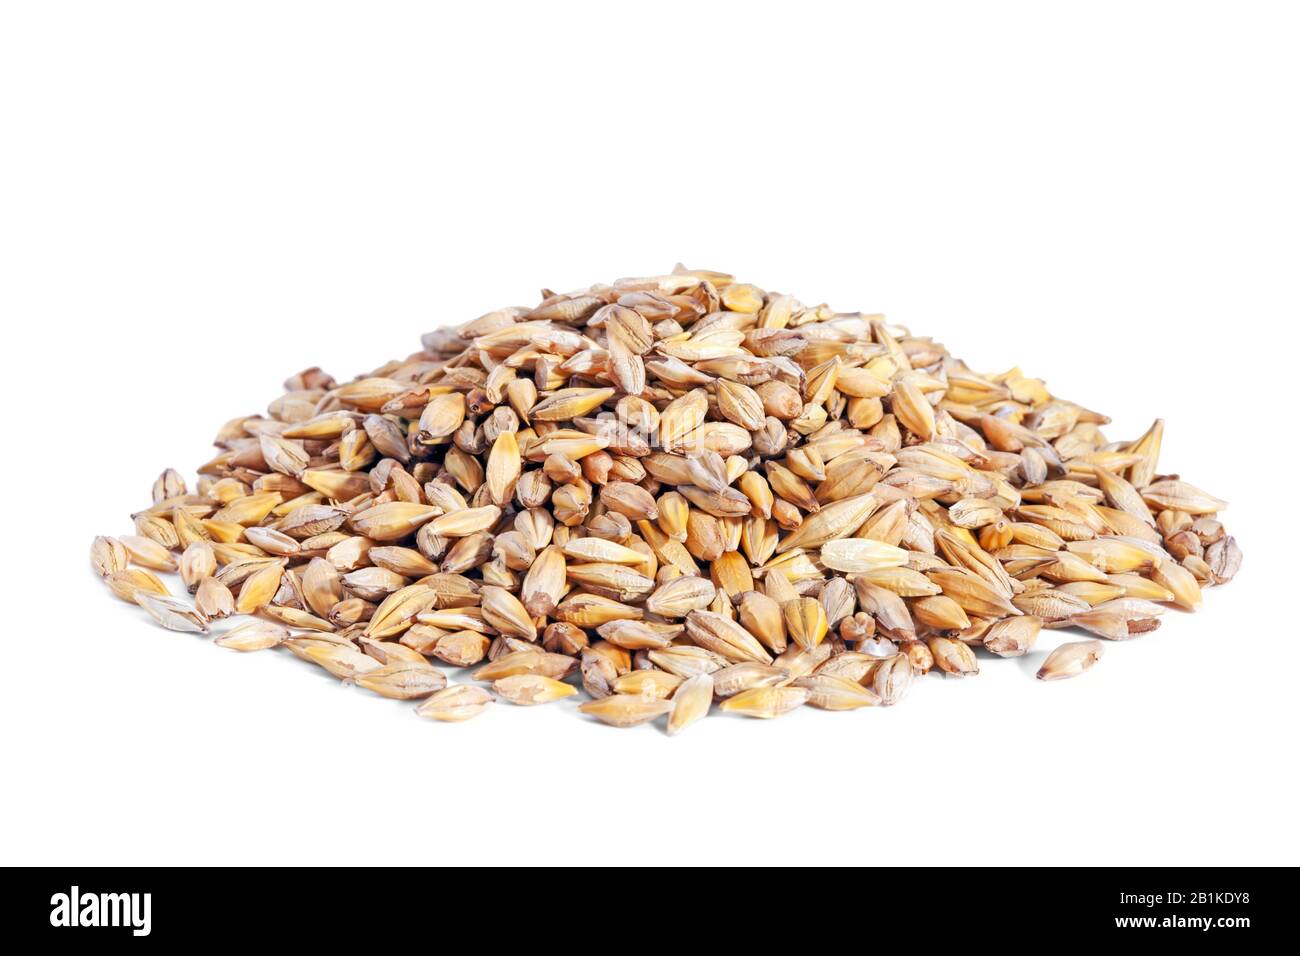 Pile Barley grain (Hordeum) isolated on white background. Barley is a major cereal grain, a member of the grass family. Stock Photo